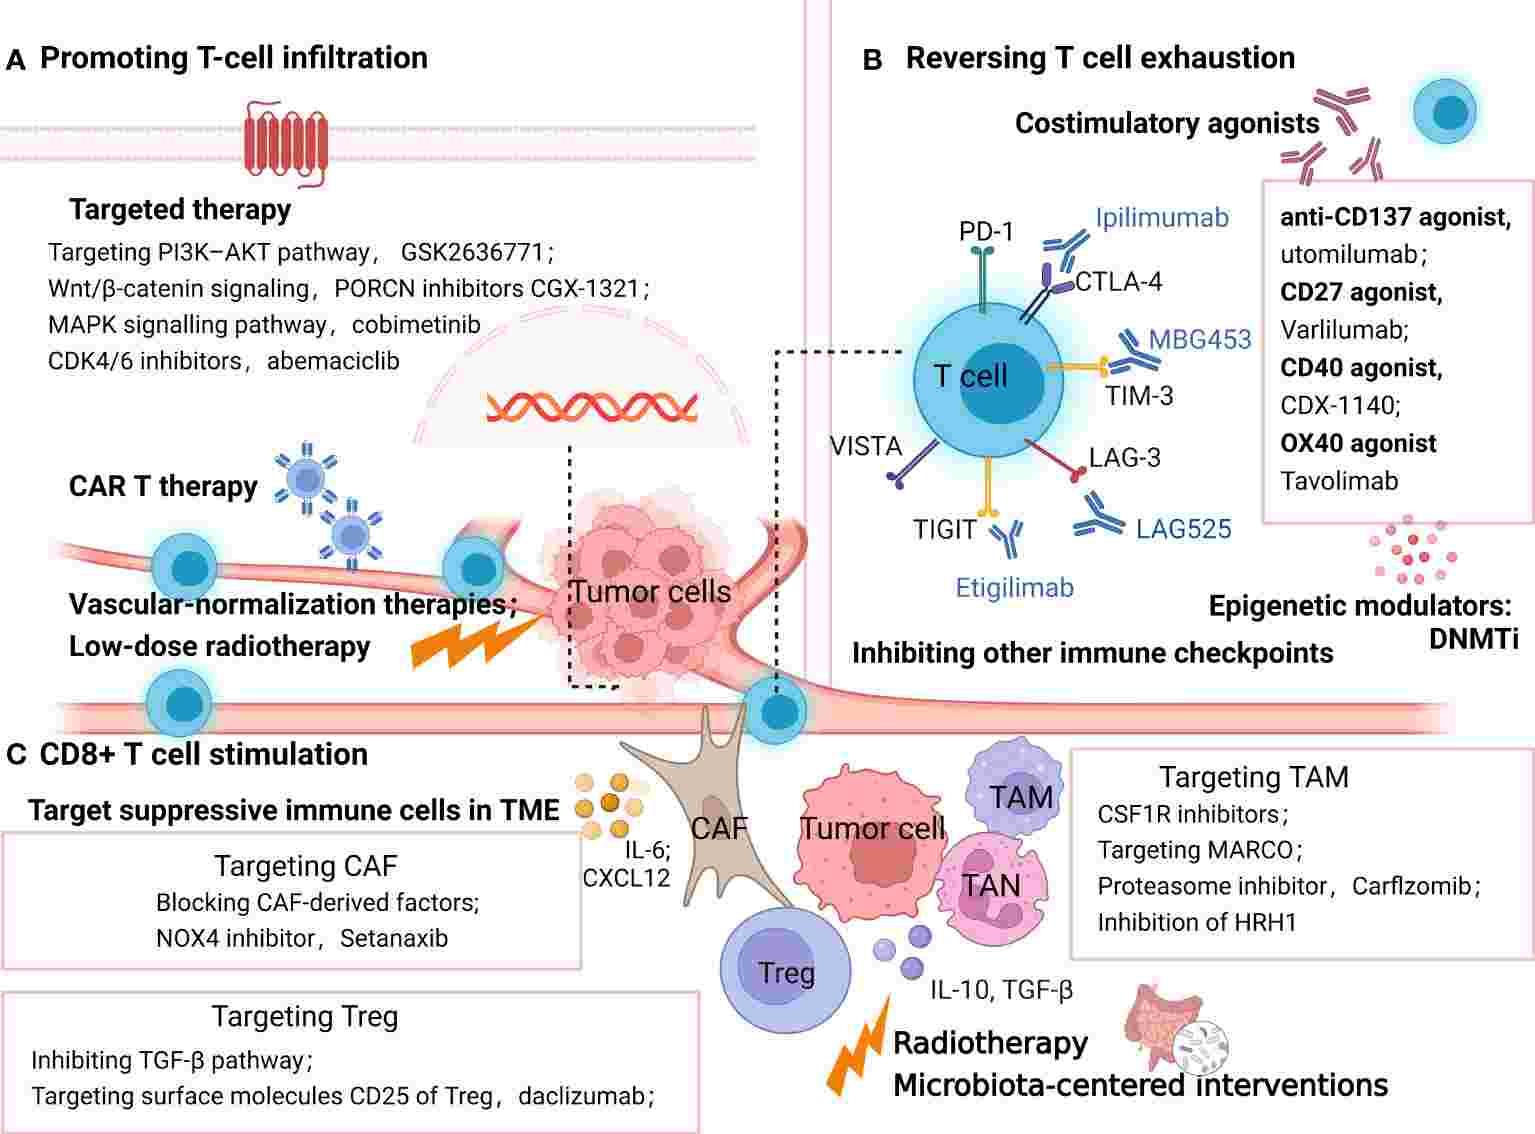 Strategies to overcome PD-1/PD-L1 resistance through enhancement of T-cell infiltration, reversal of T-cell exhaustion, and stimulation of CD8+ T cells. (Zhou, et al., 2022)